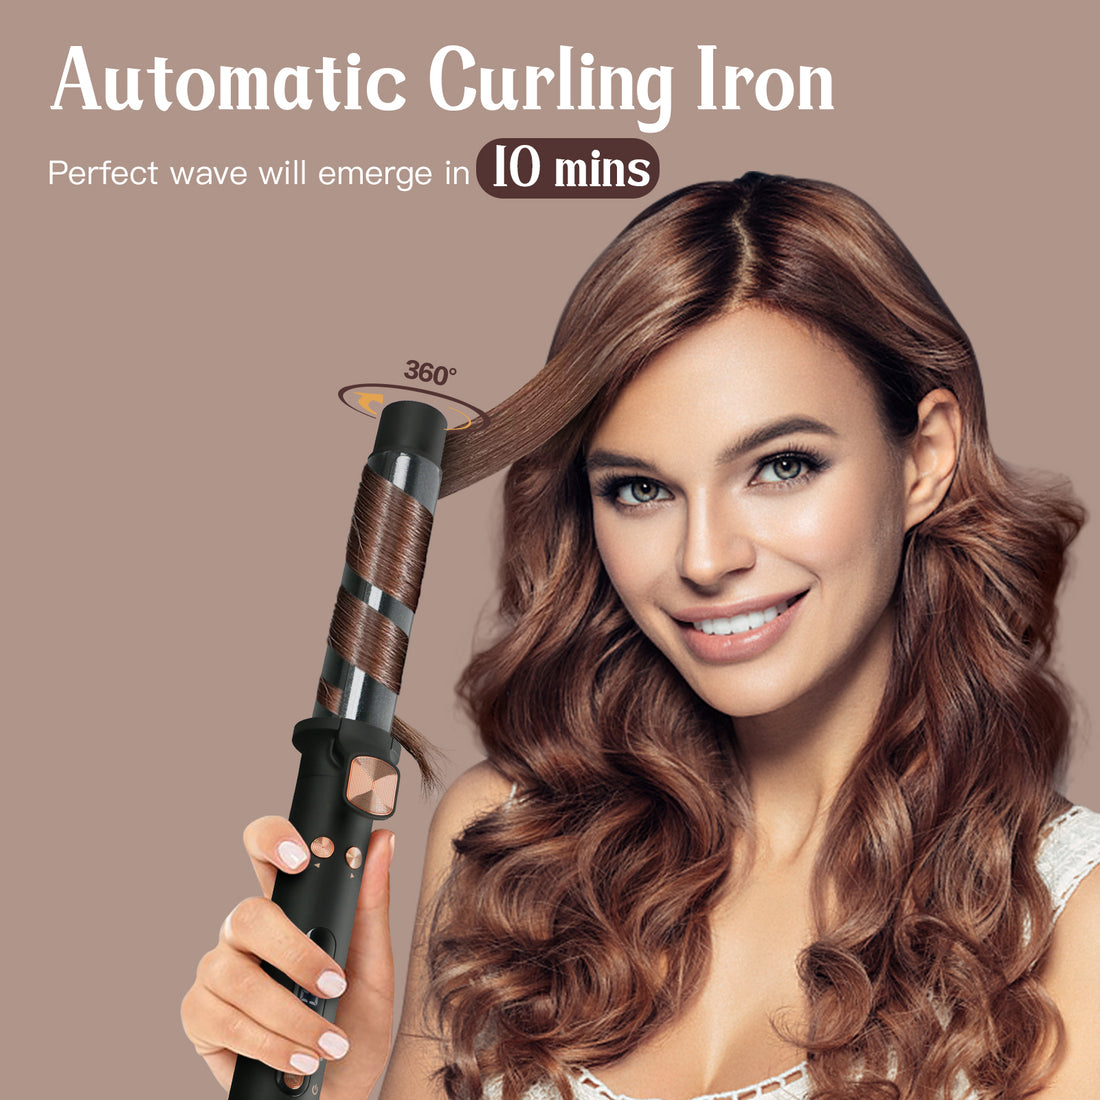 Wechip Self-Rotating Curling Iron